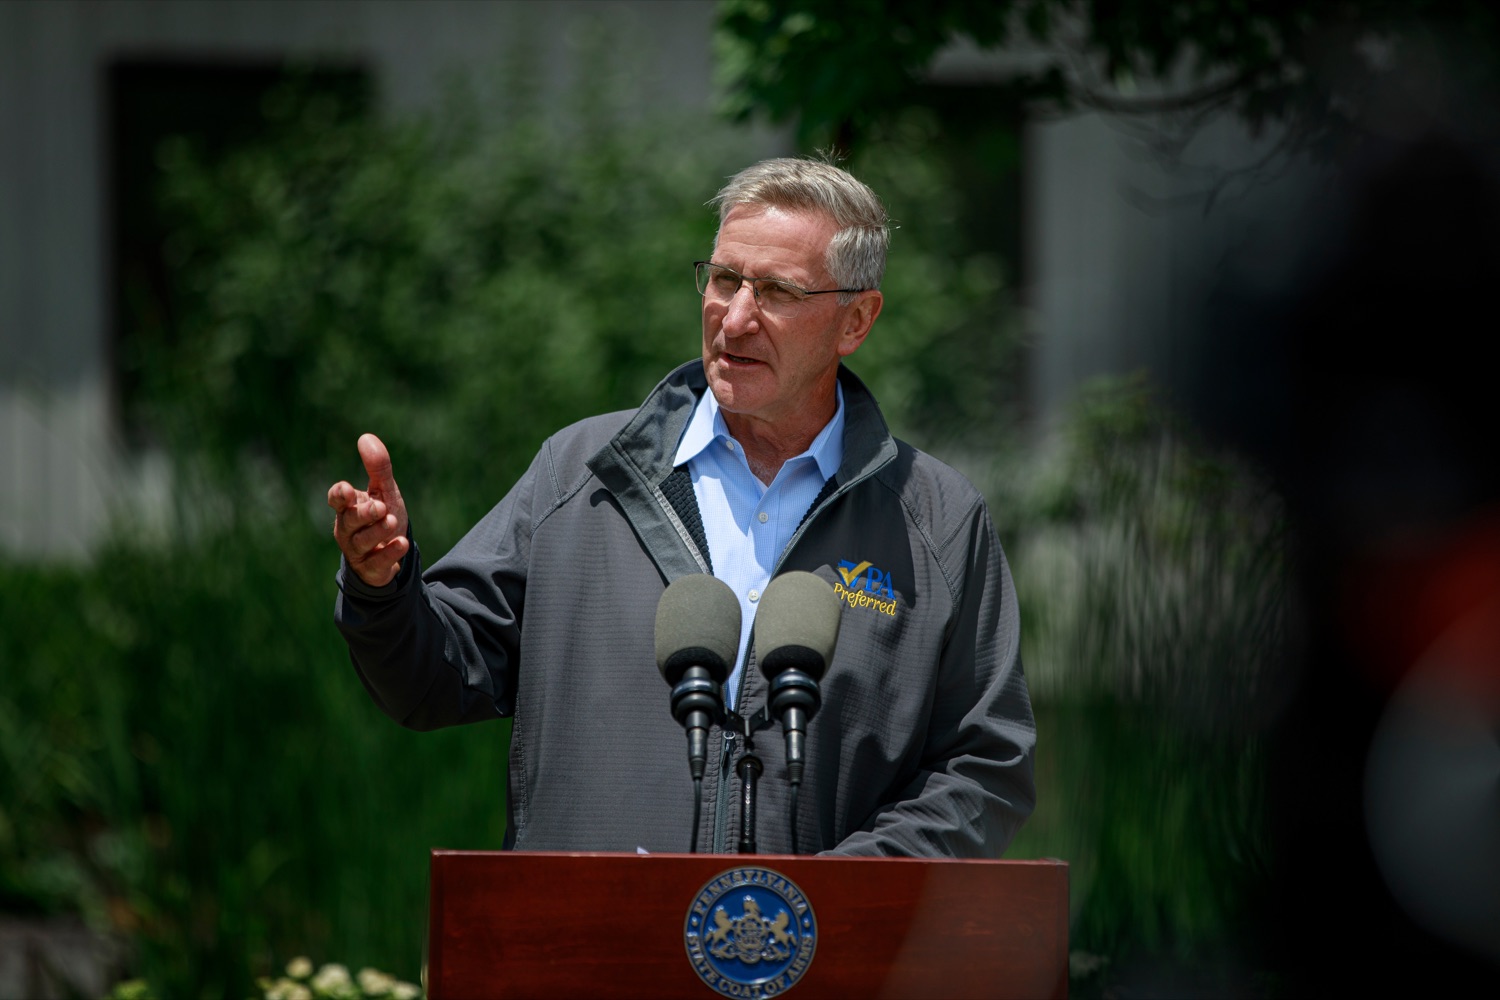 Dept. of Agriculture Secretary Russell Redding speaks during a press conference, which provided an update on the state of spotted lanternfly in Pennsylvania and the path to beating this invasive specie, at Eichenlaub Inc. in Allegheny County, on Tuesday, June 22, 2021.<br><a href="https://filesource.amperwave.net/commonwealthofpa/photo/18842_AGRIC_SLF_NK_010.jpg" target="_blank">⇣ Download Photo</a>